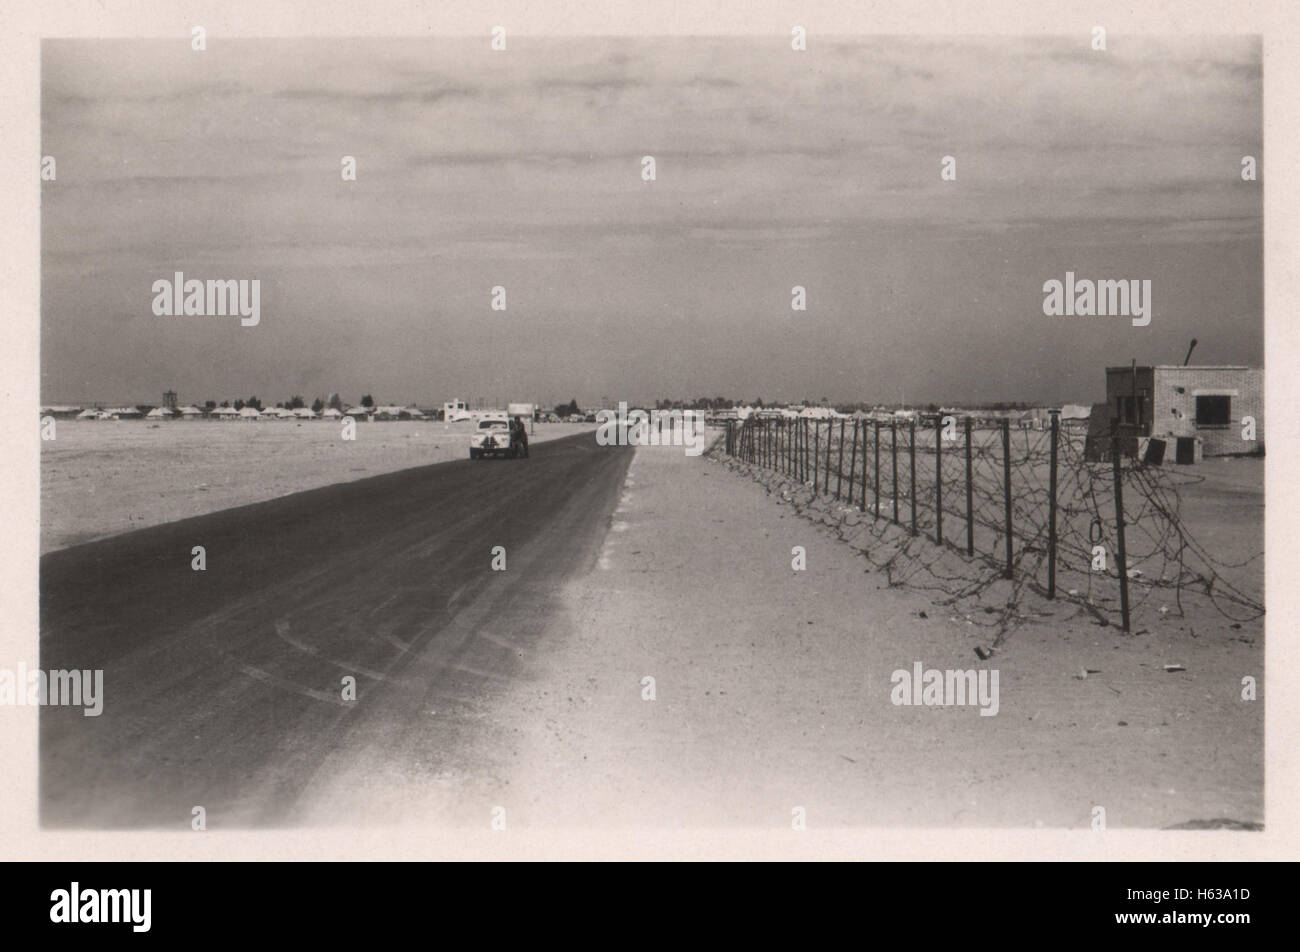 Road outside a British army base in Egypt in the period prior to withdrawal of British troops from the Suez Canal zone and the Suez Crisis. Location 10 Base Ordnance Depot Royal Army Ordnance Corps (RAOC) camp at Geneifa Ismailia area near the Suez Canal 1952 Stock Photo